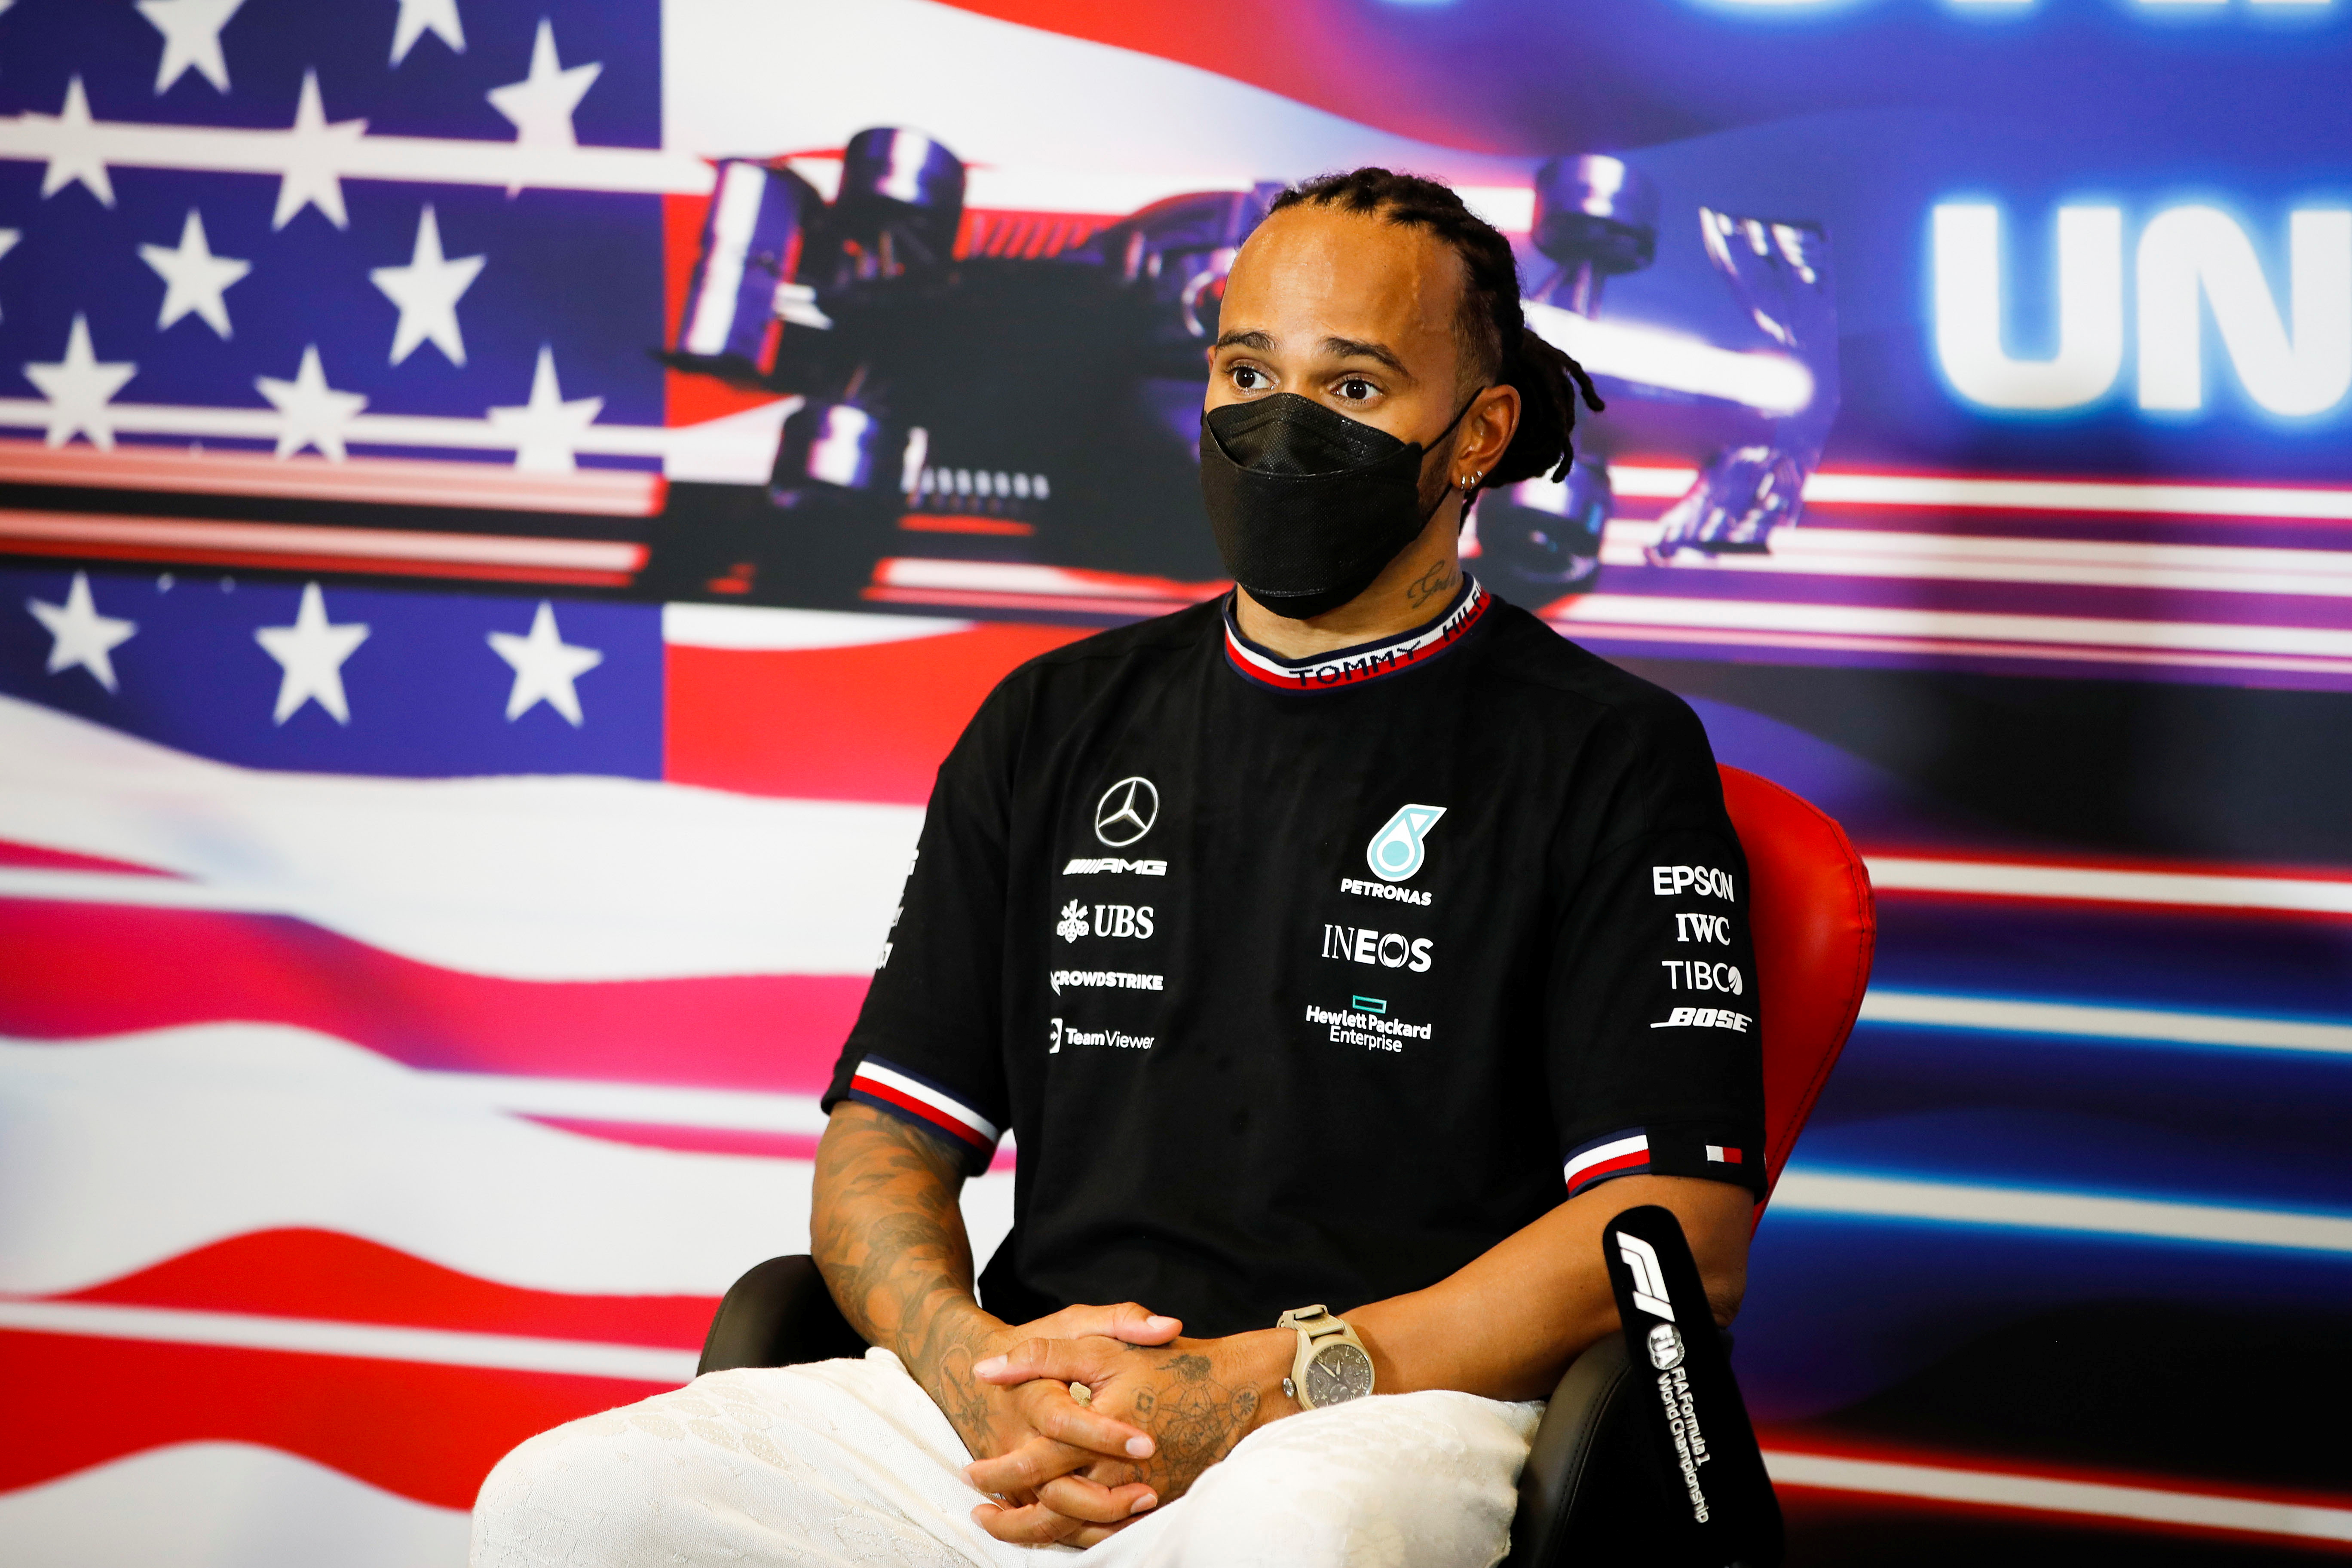 Formula One F1 - United States Grand Prix - Circuit of the Americas, Austin, Texas, U.S. - October 24, 2021 Mercedes' Lewis Hamilton during a press conference after finishing the United States Grand Prix in second place  FIA/Handout via REUTERS   